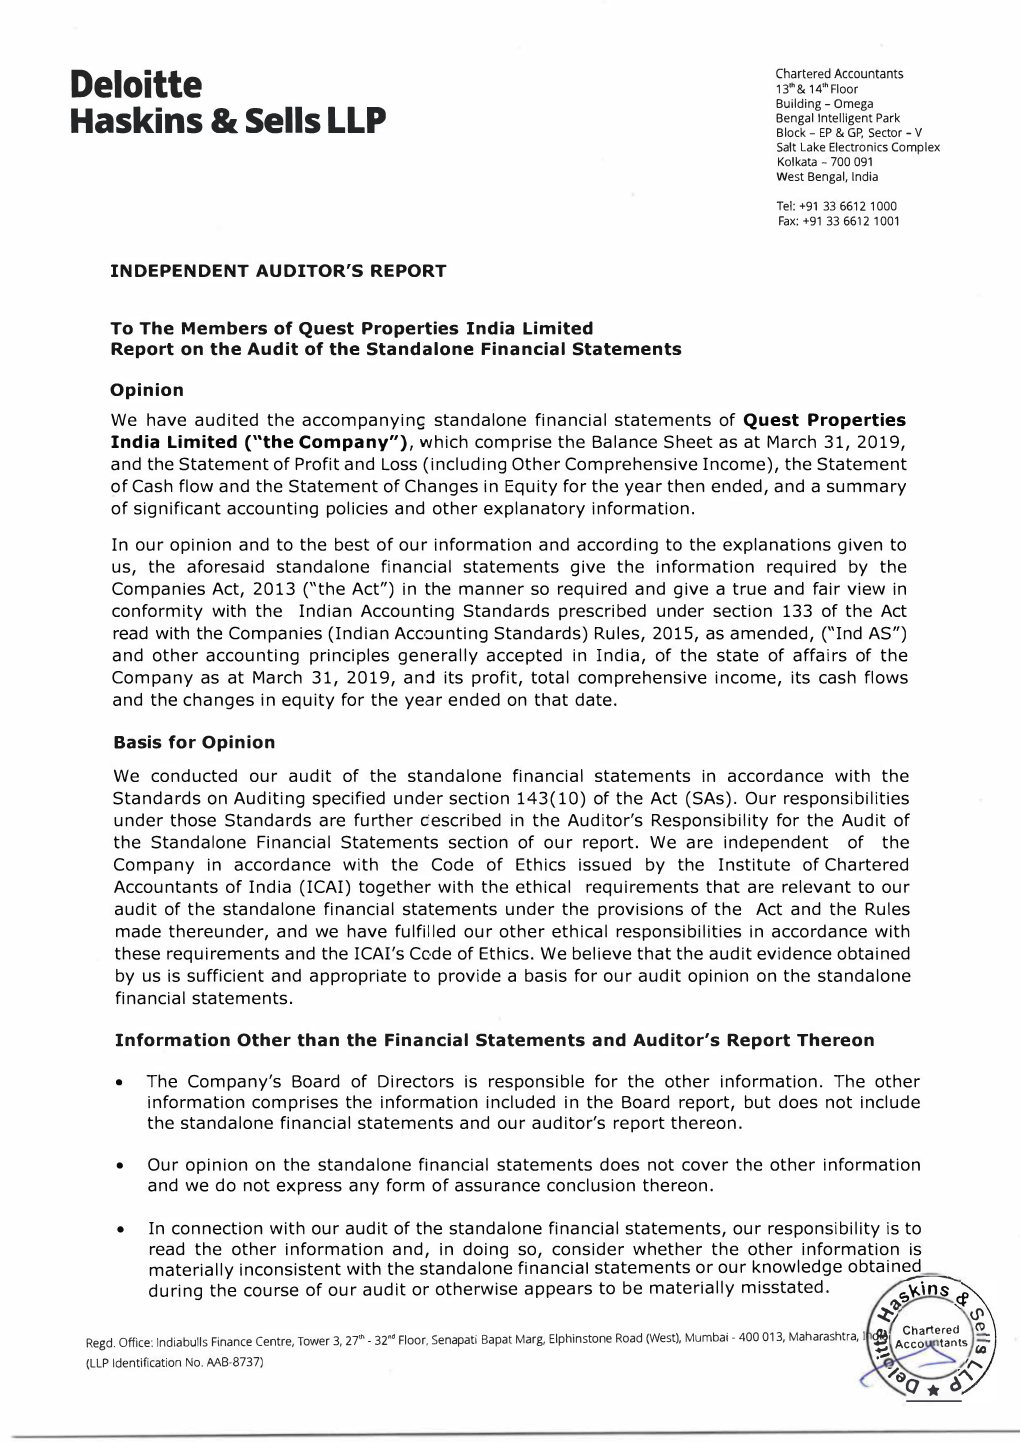 Quest Properties India Limited Report on the Audit of the Standalone Financial Statements